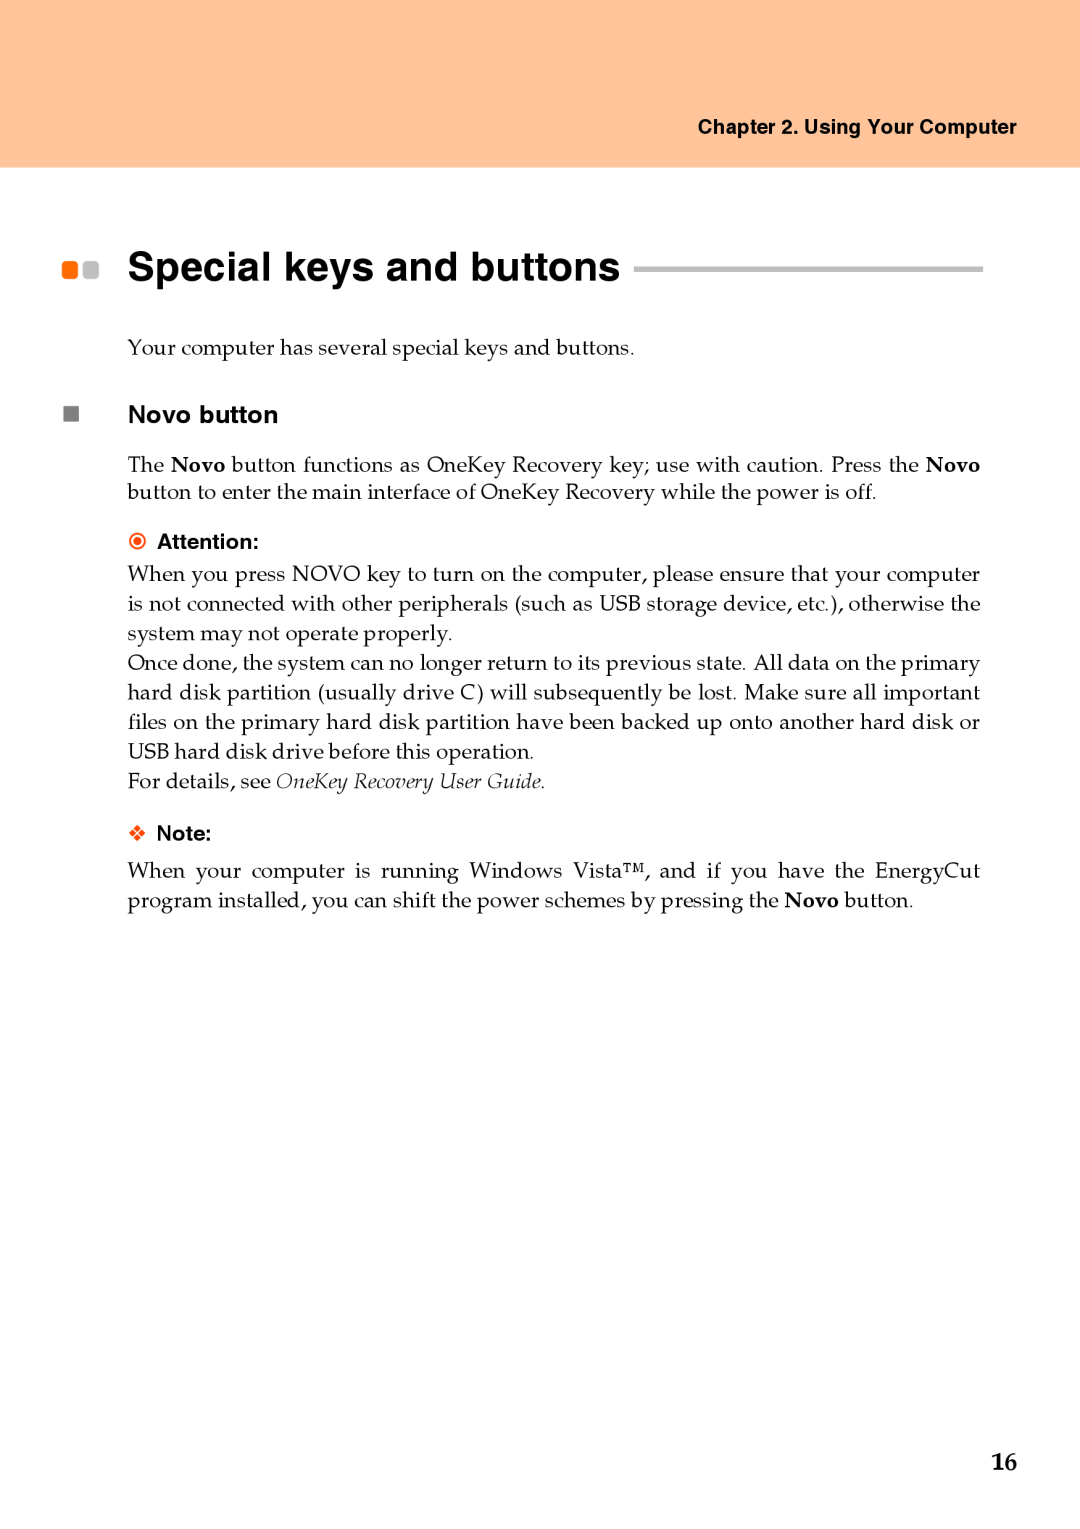 Lenovo Y510 warranty Special keys and buttons, „ Novo button, Using Your Computer, € Attention, ™ Note 